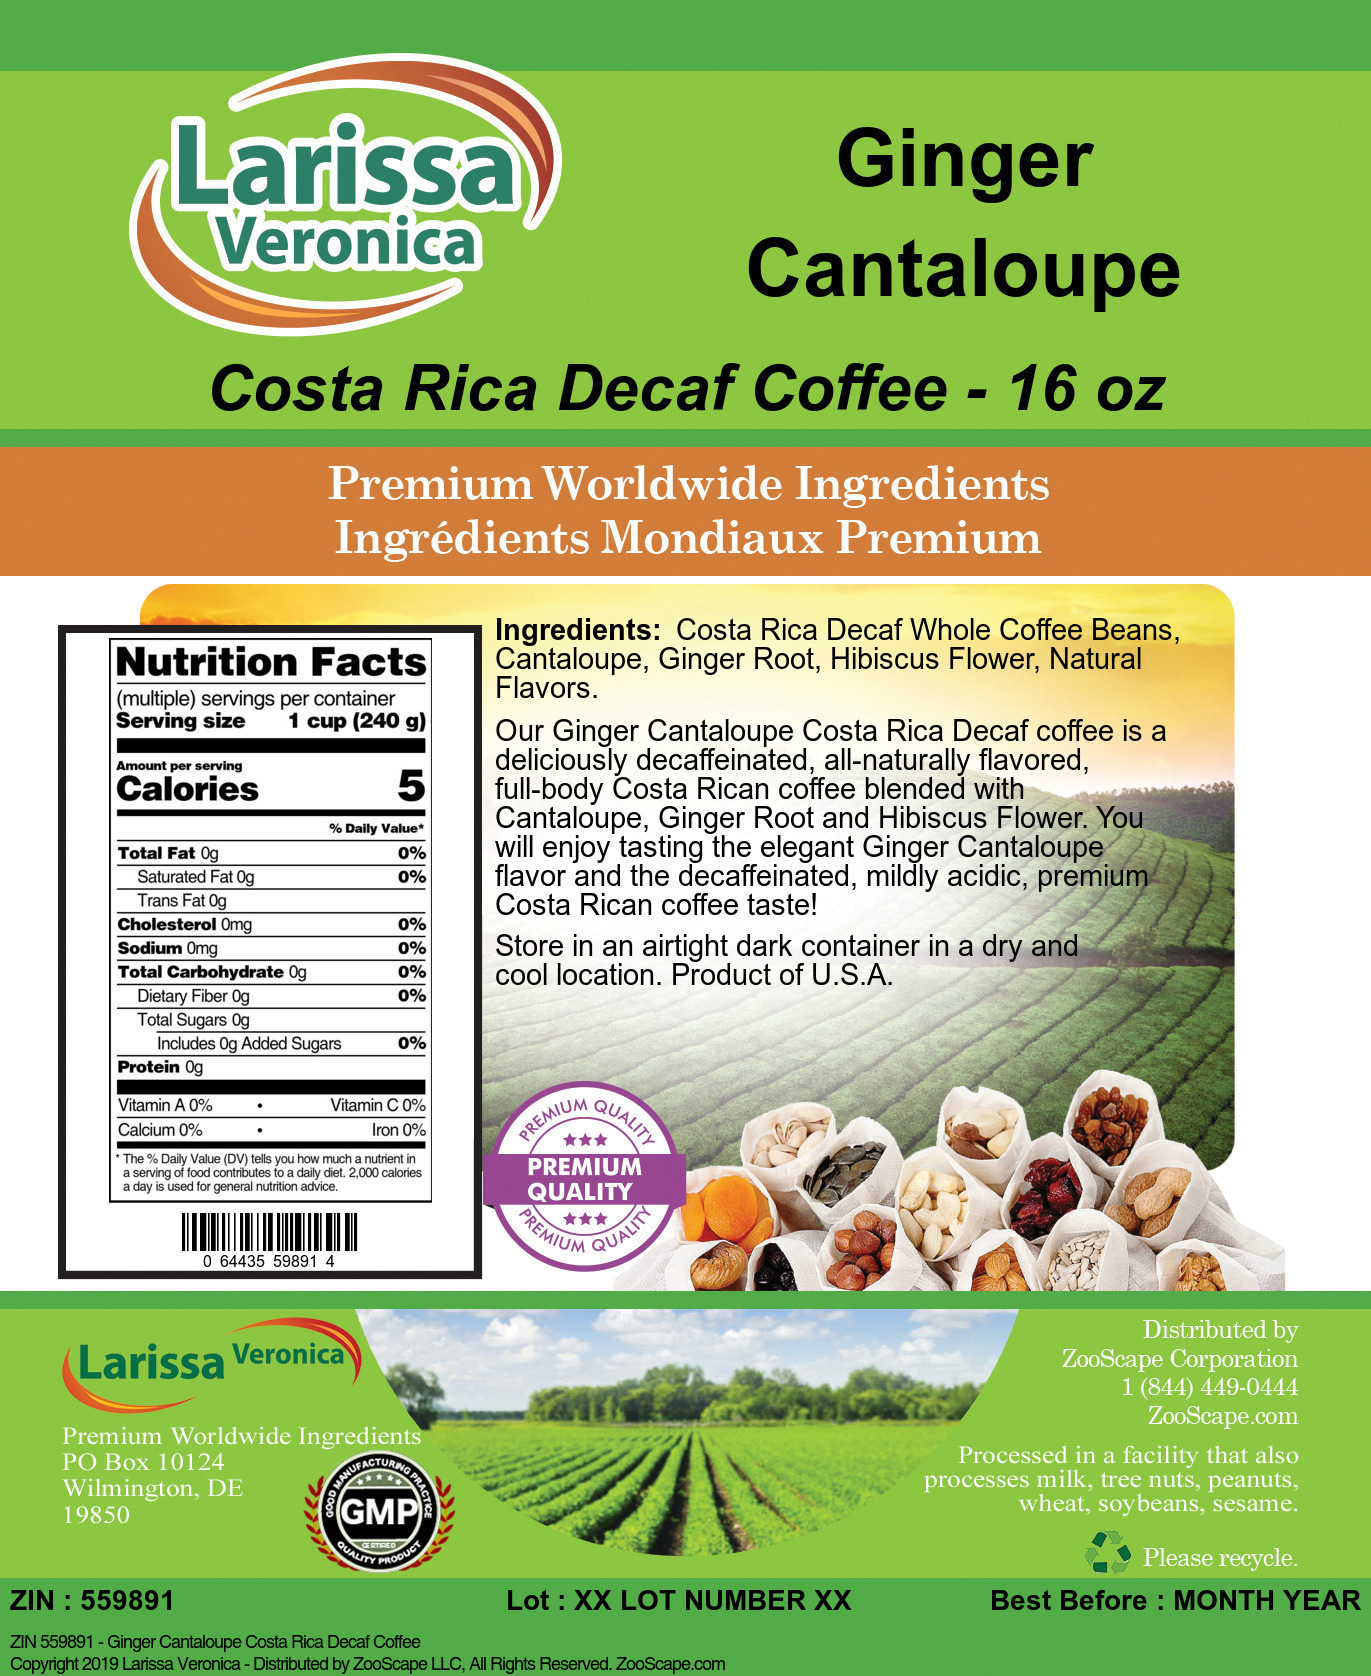 Ginger Cantaloupe Costa Rica Decaf Coffee - Label